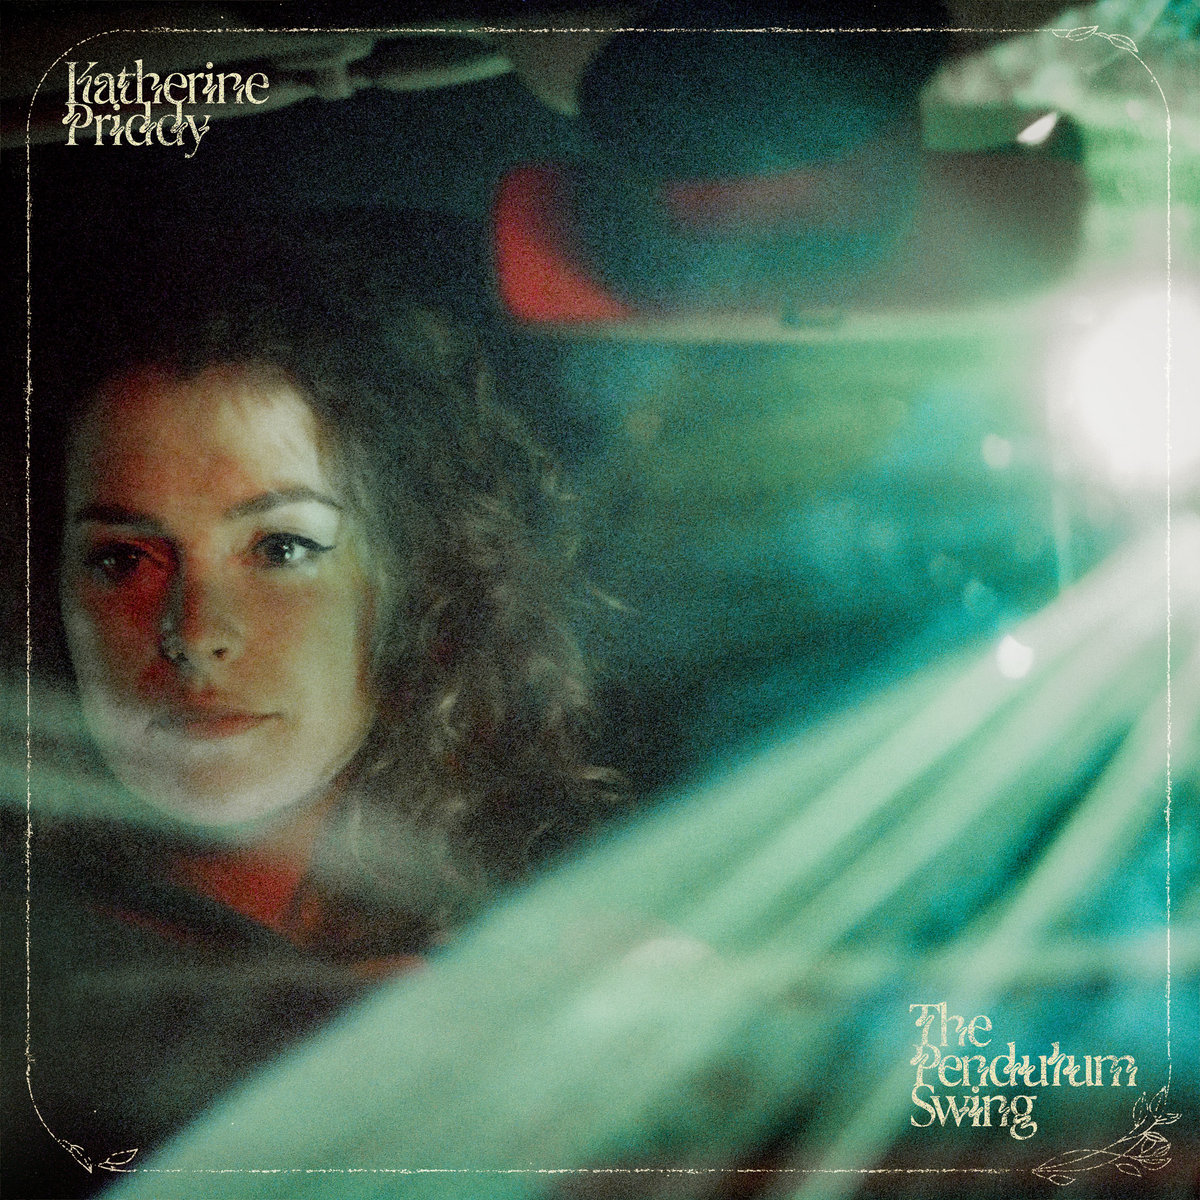 #np 'These Words of Mine' by UK singer-songwriter @KatherinePriddy on Australia's LGBTQIA+ radio station, @JOY949 - I love this tune from her new album THE PENDULUM SWING